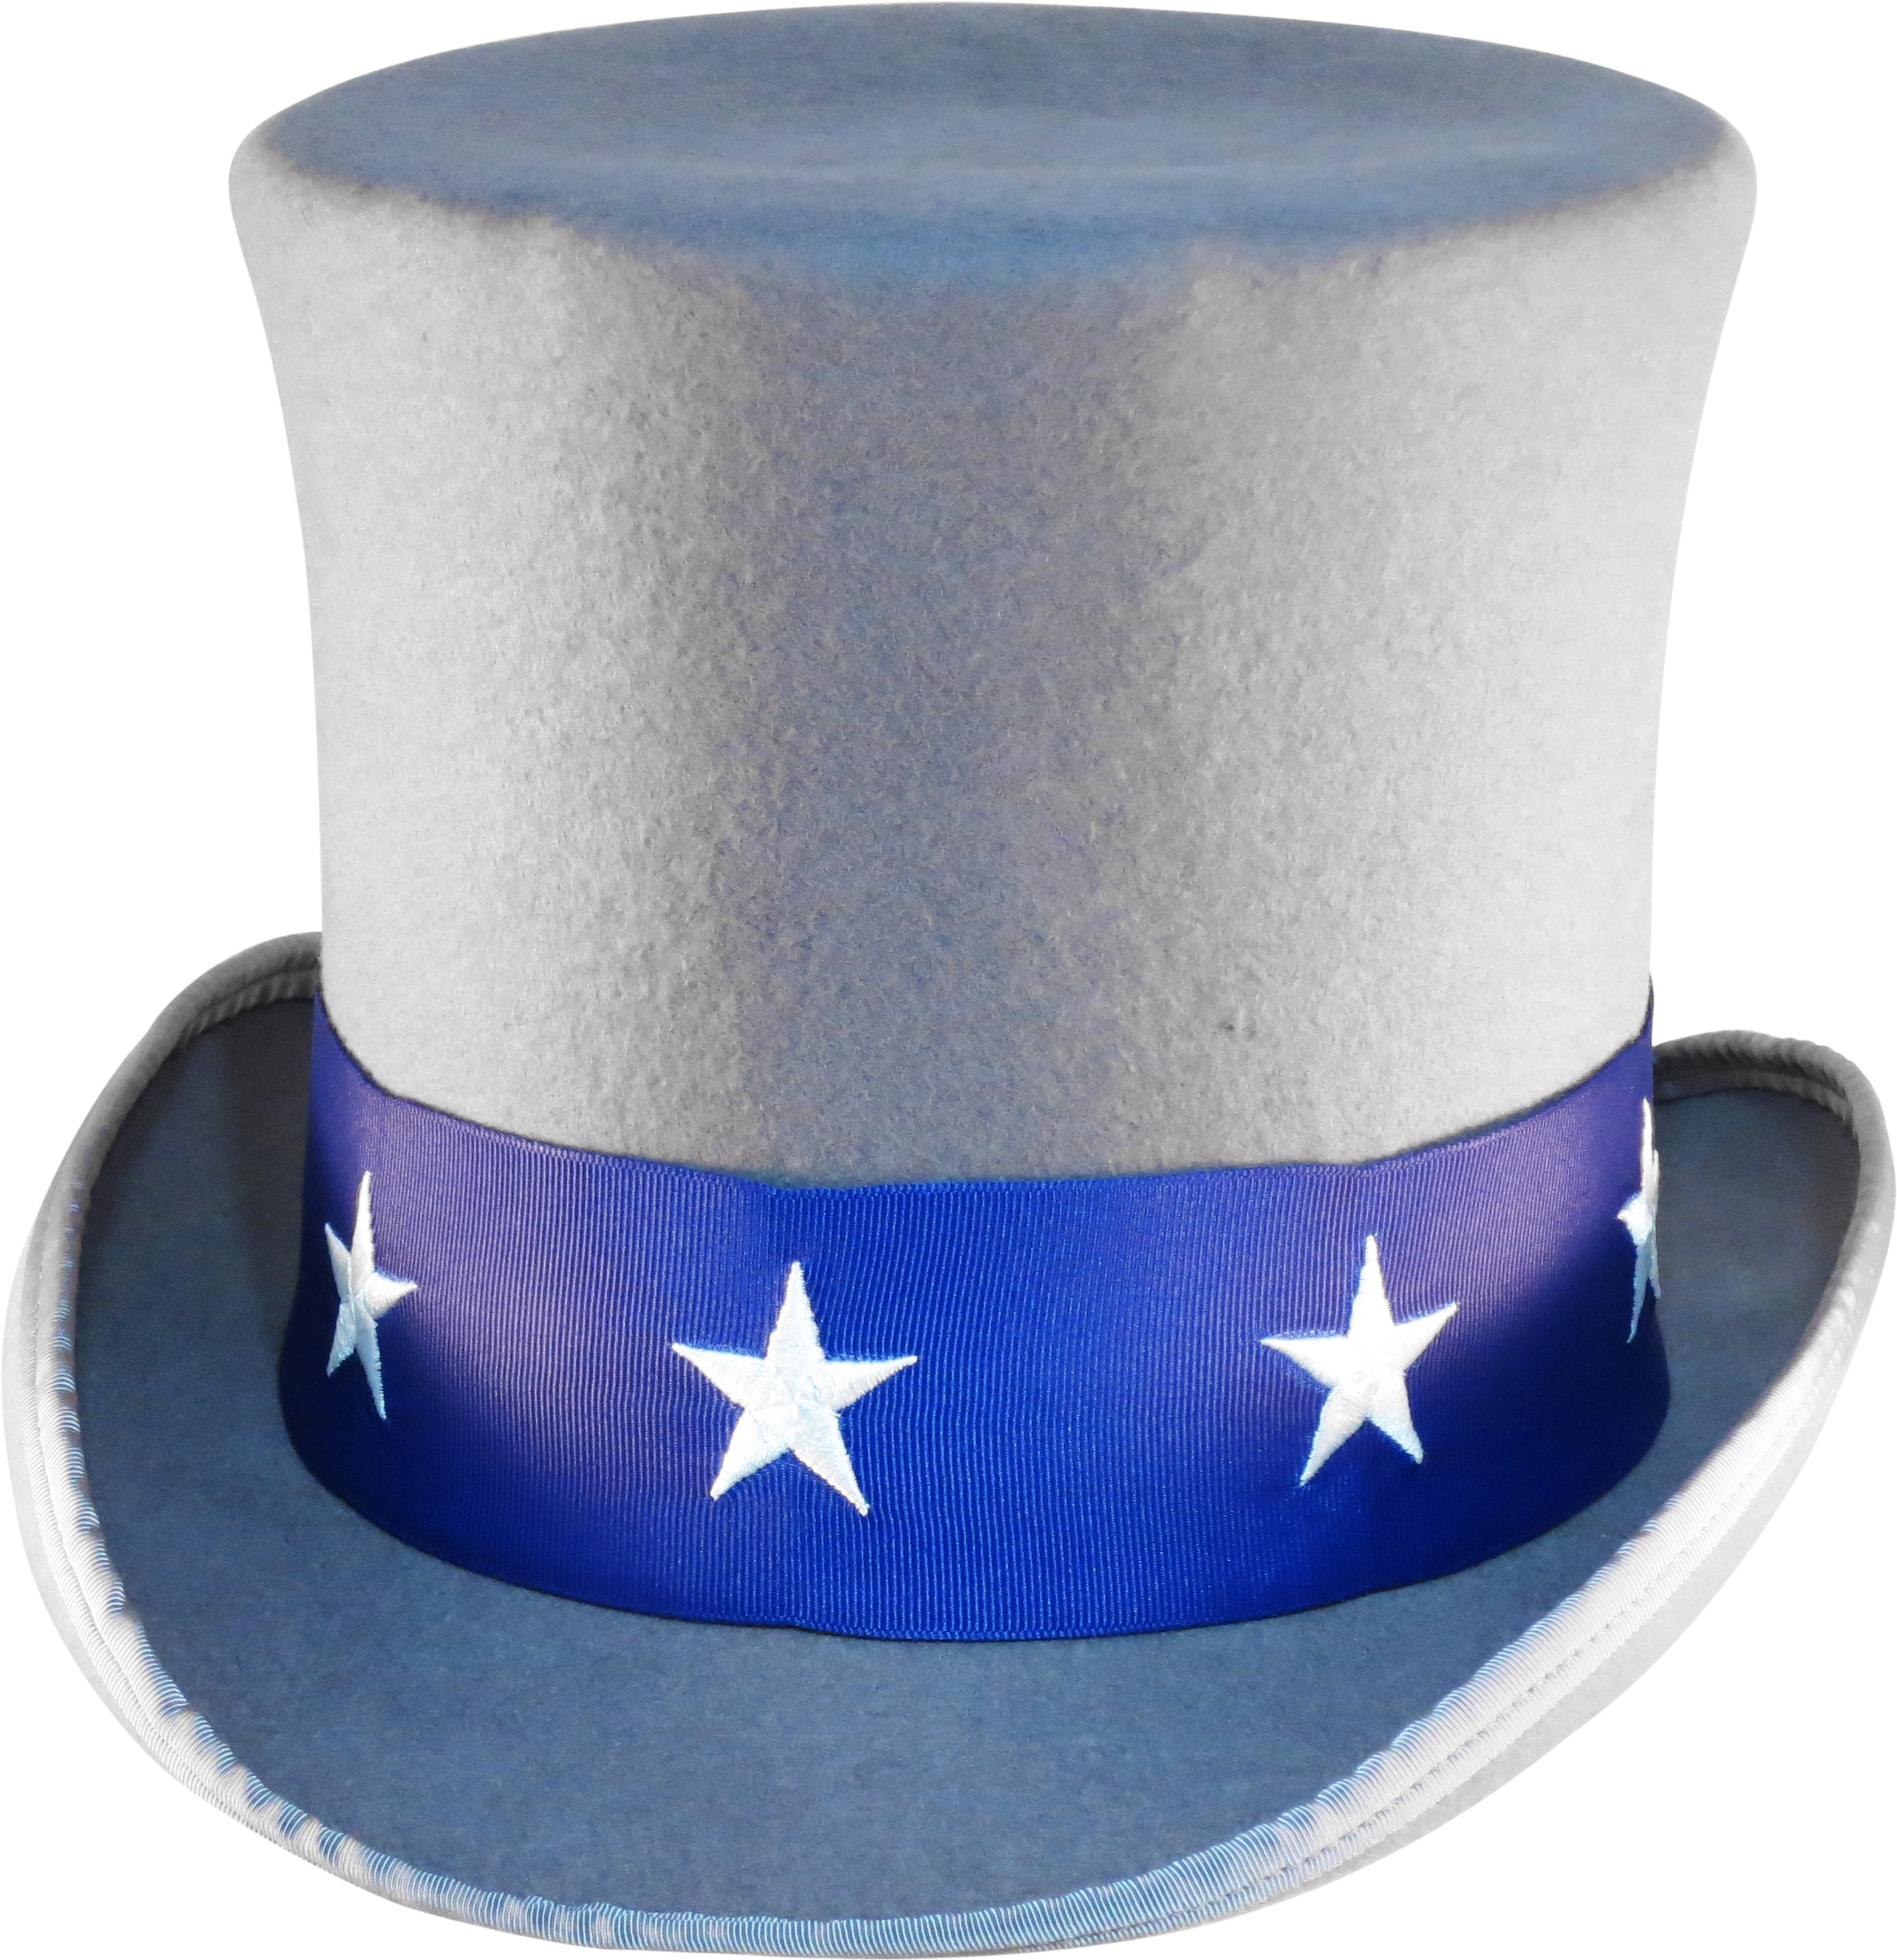 A Top Hat With Stars On It